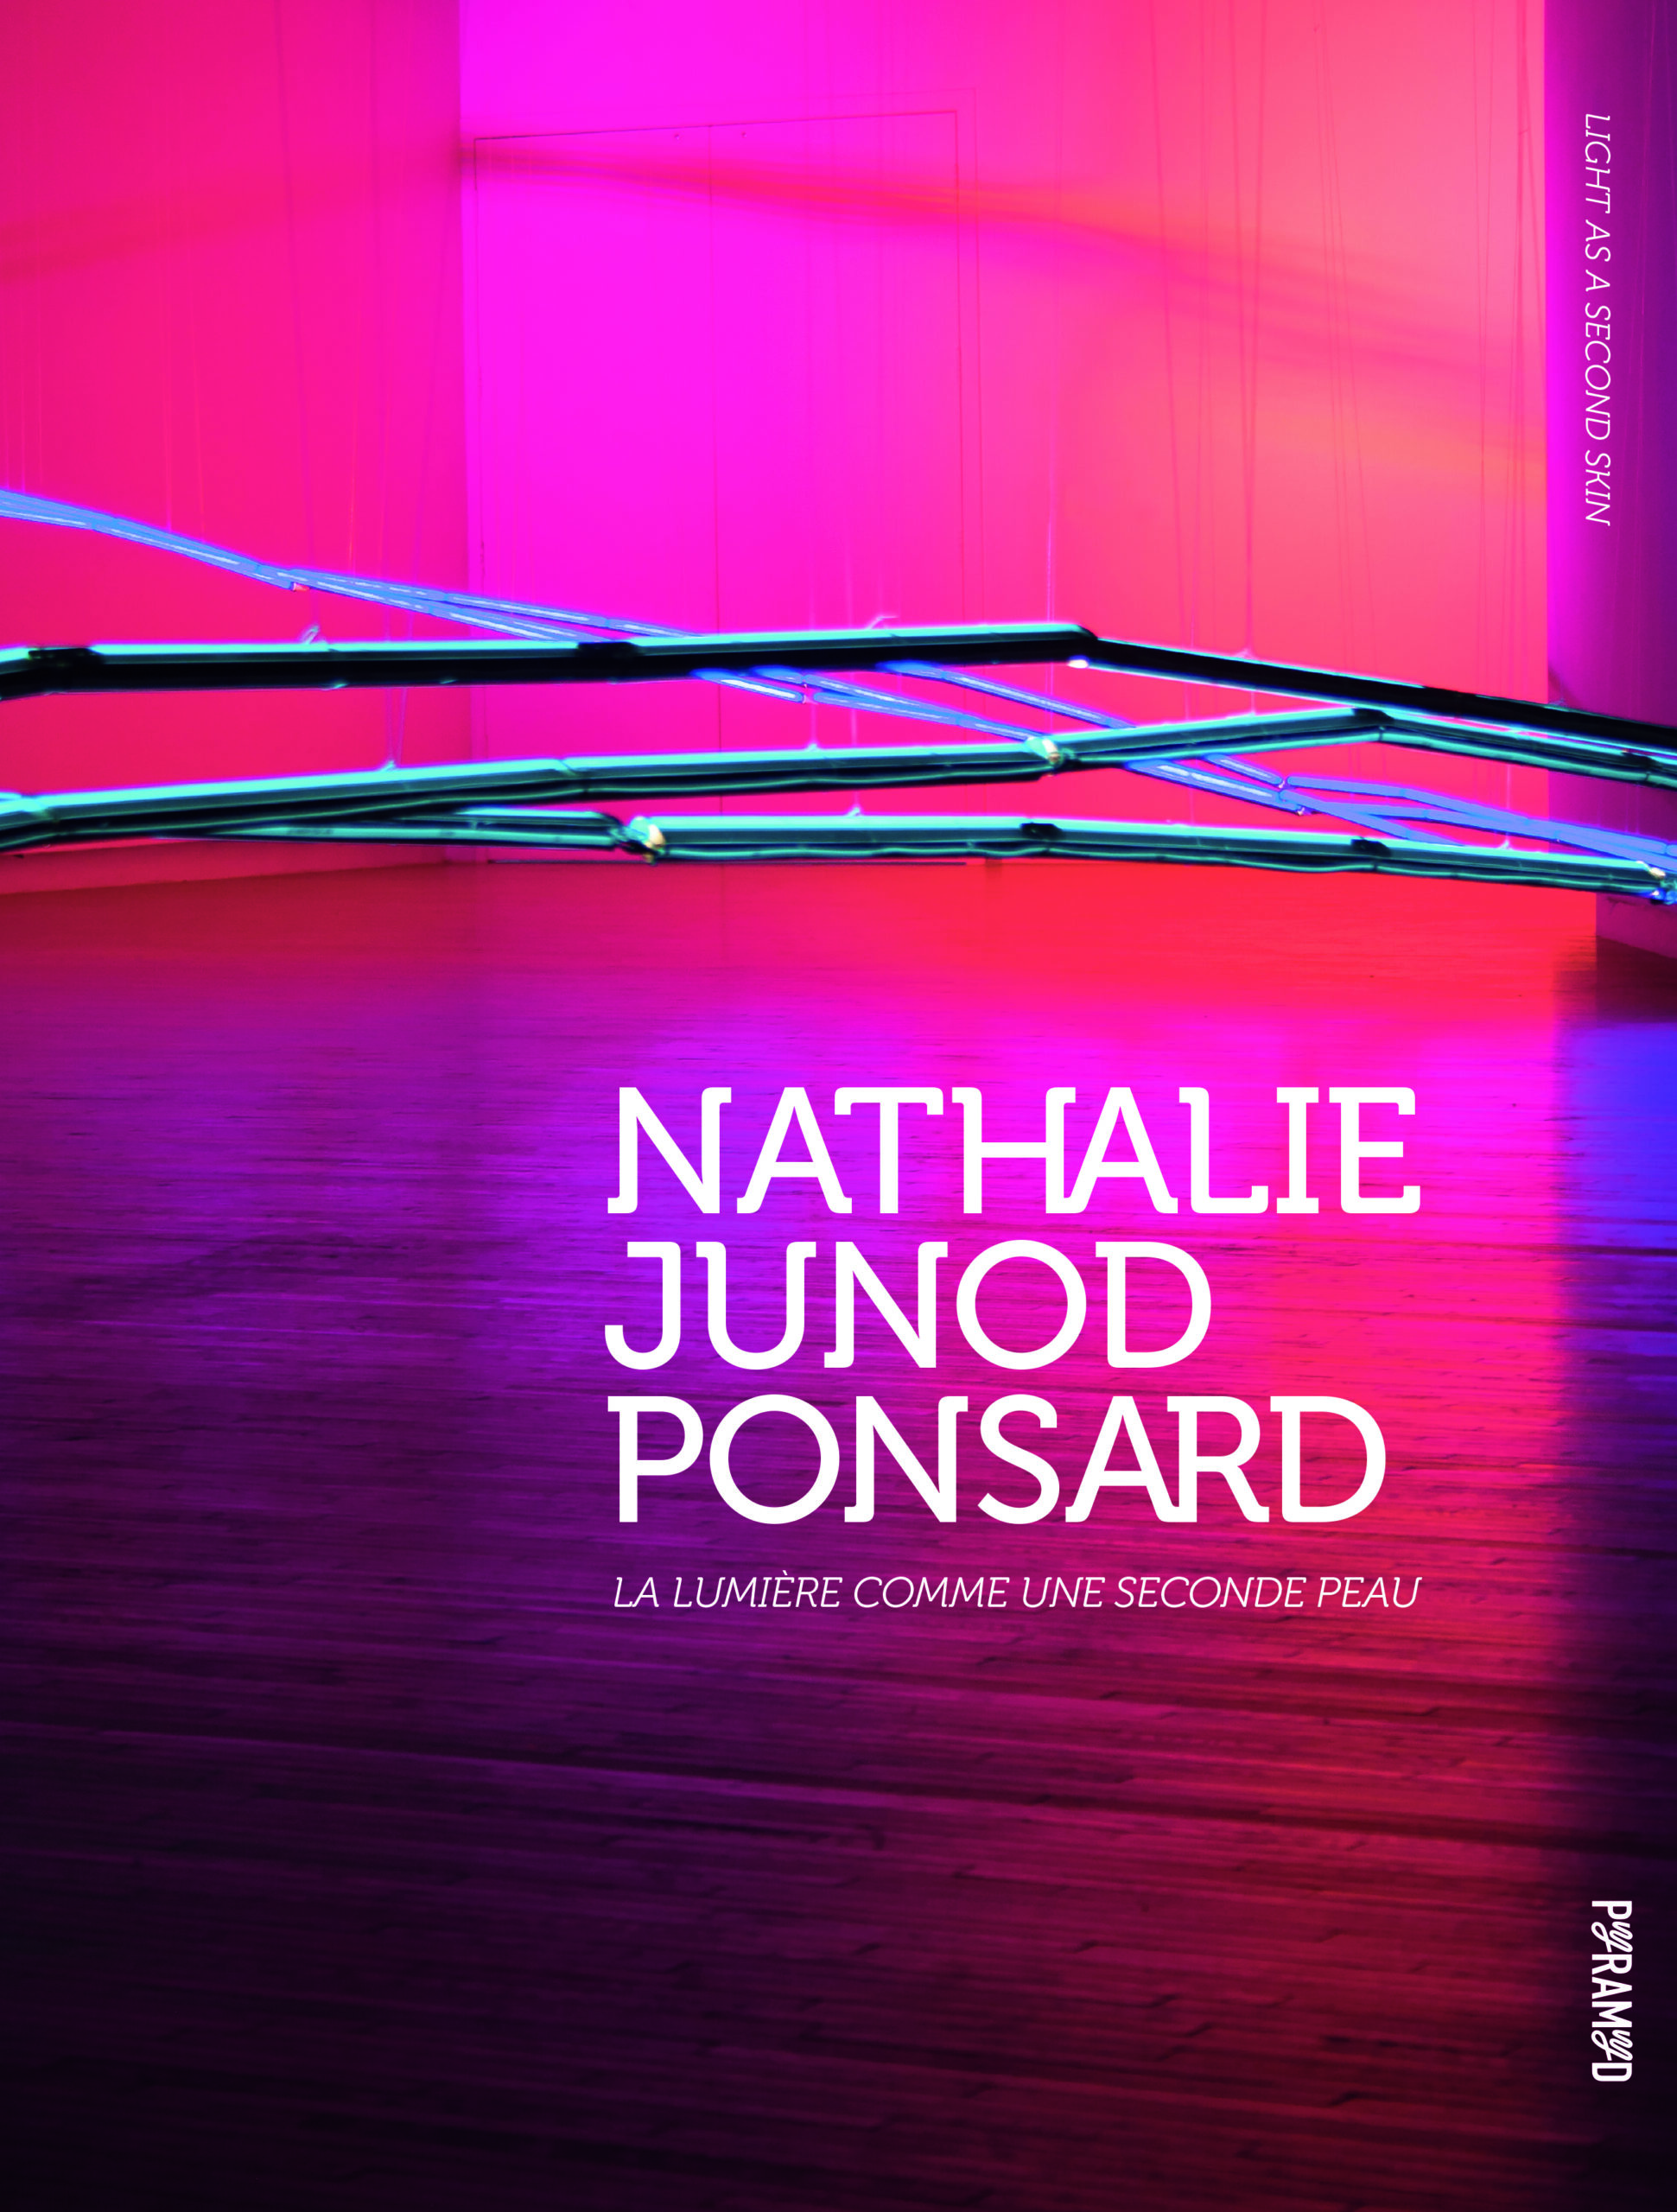 Read more about the article Meeting with Nathalie JUNOD PONSARD on the occasion of the publication of her monograph